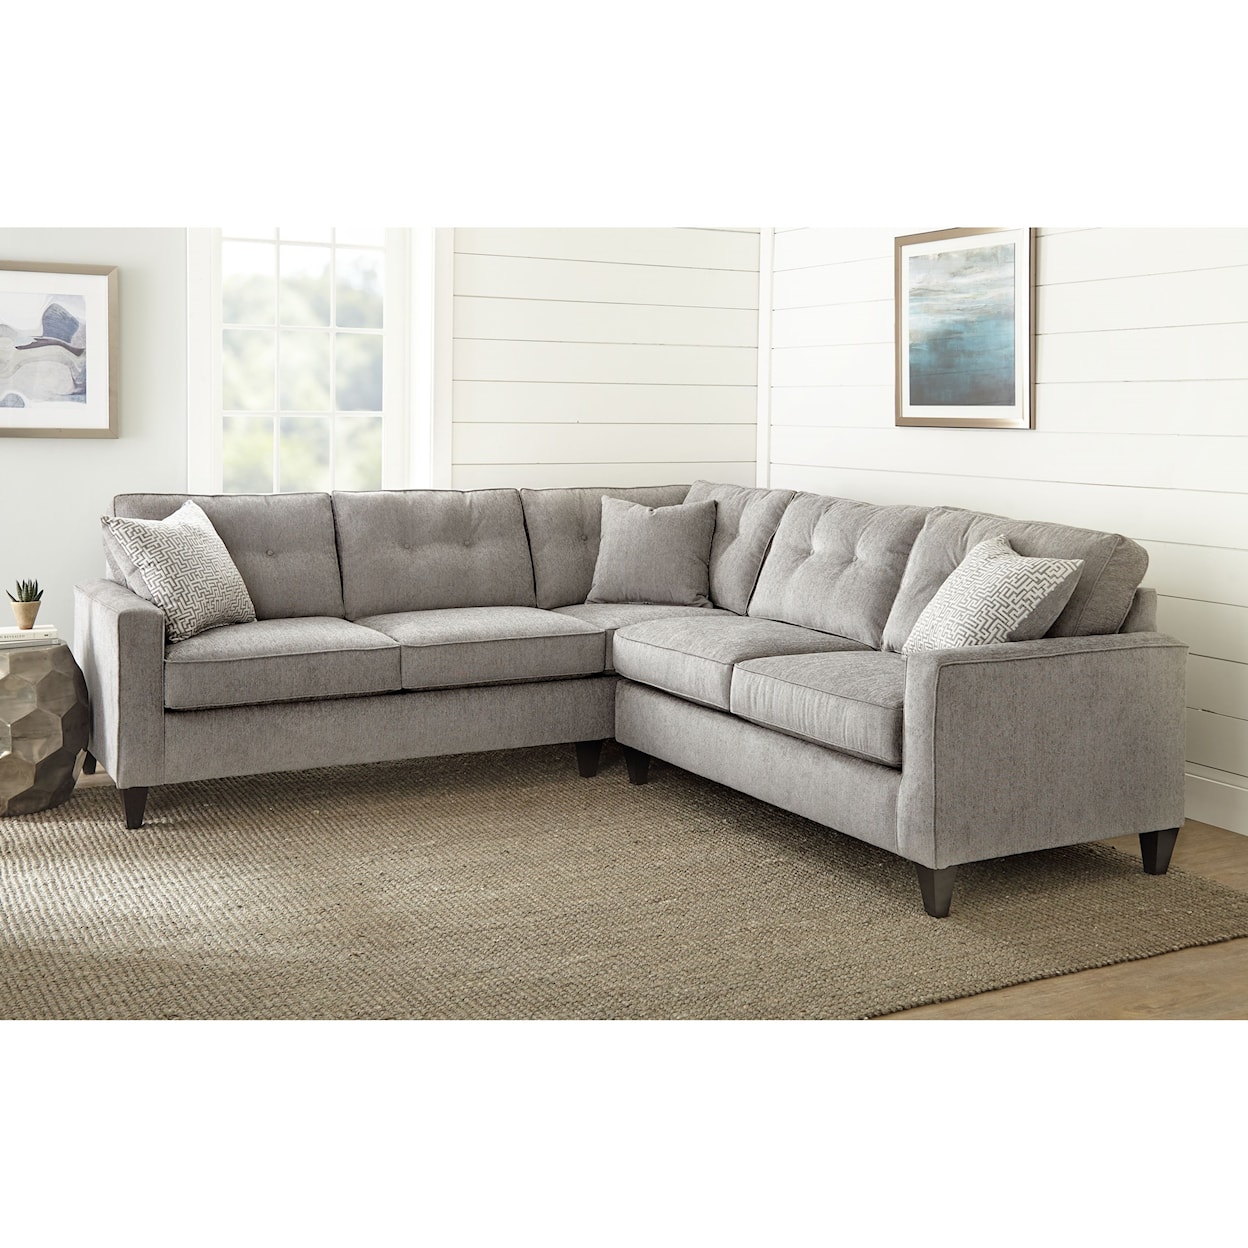 Prime Maddox 2 Piece Sectional